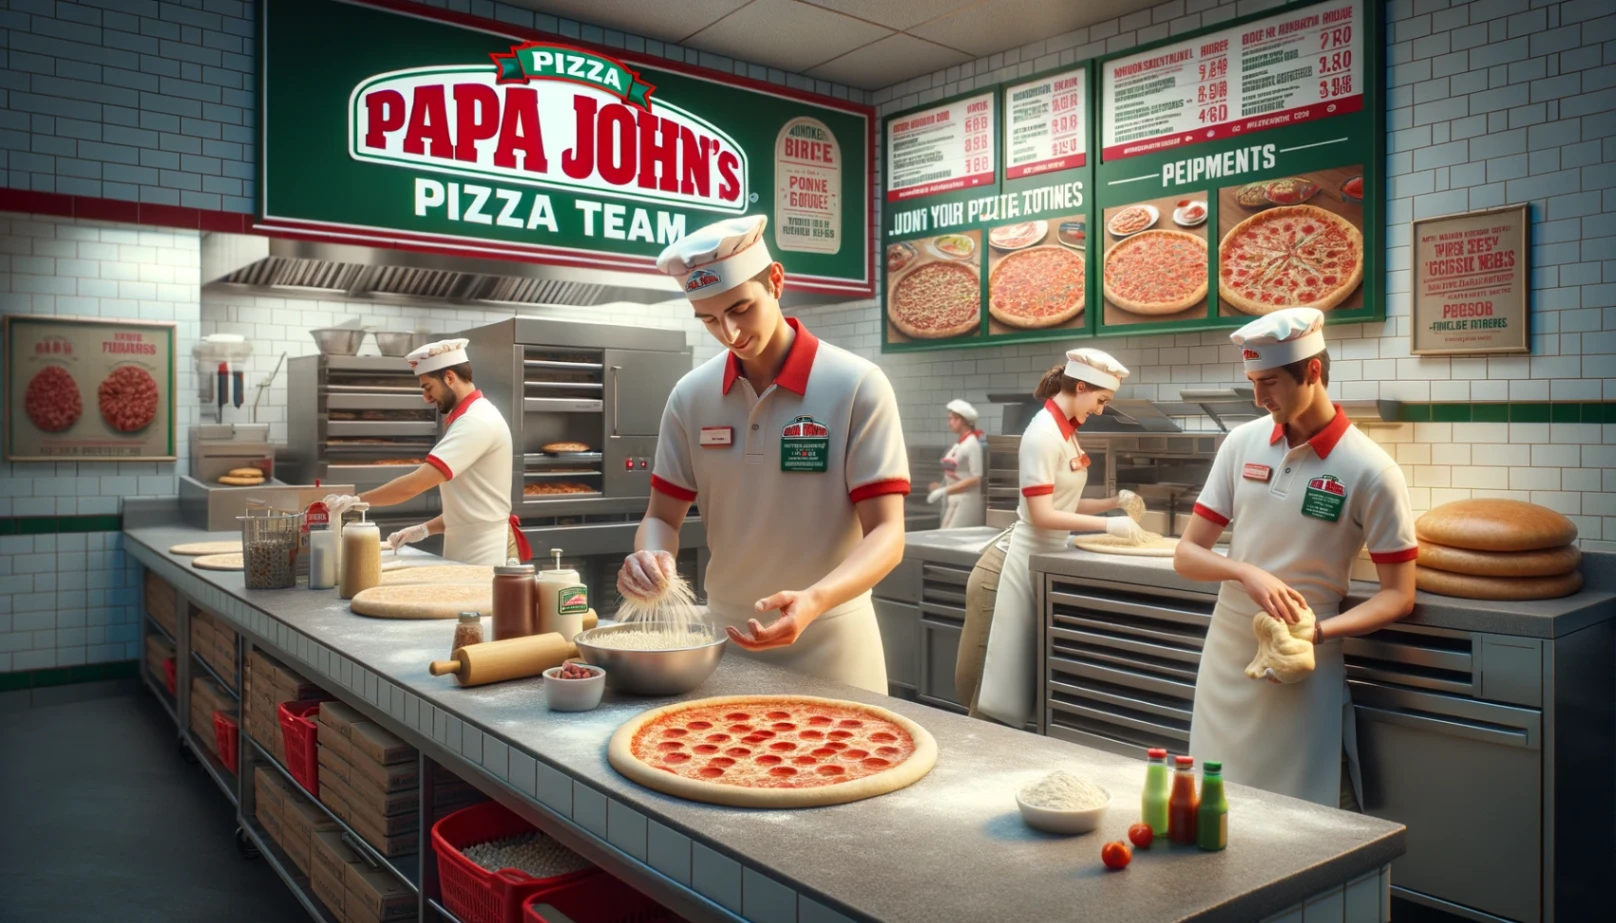 Join Papa John's Pizza Team: Learn How to Apply